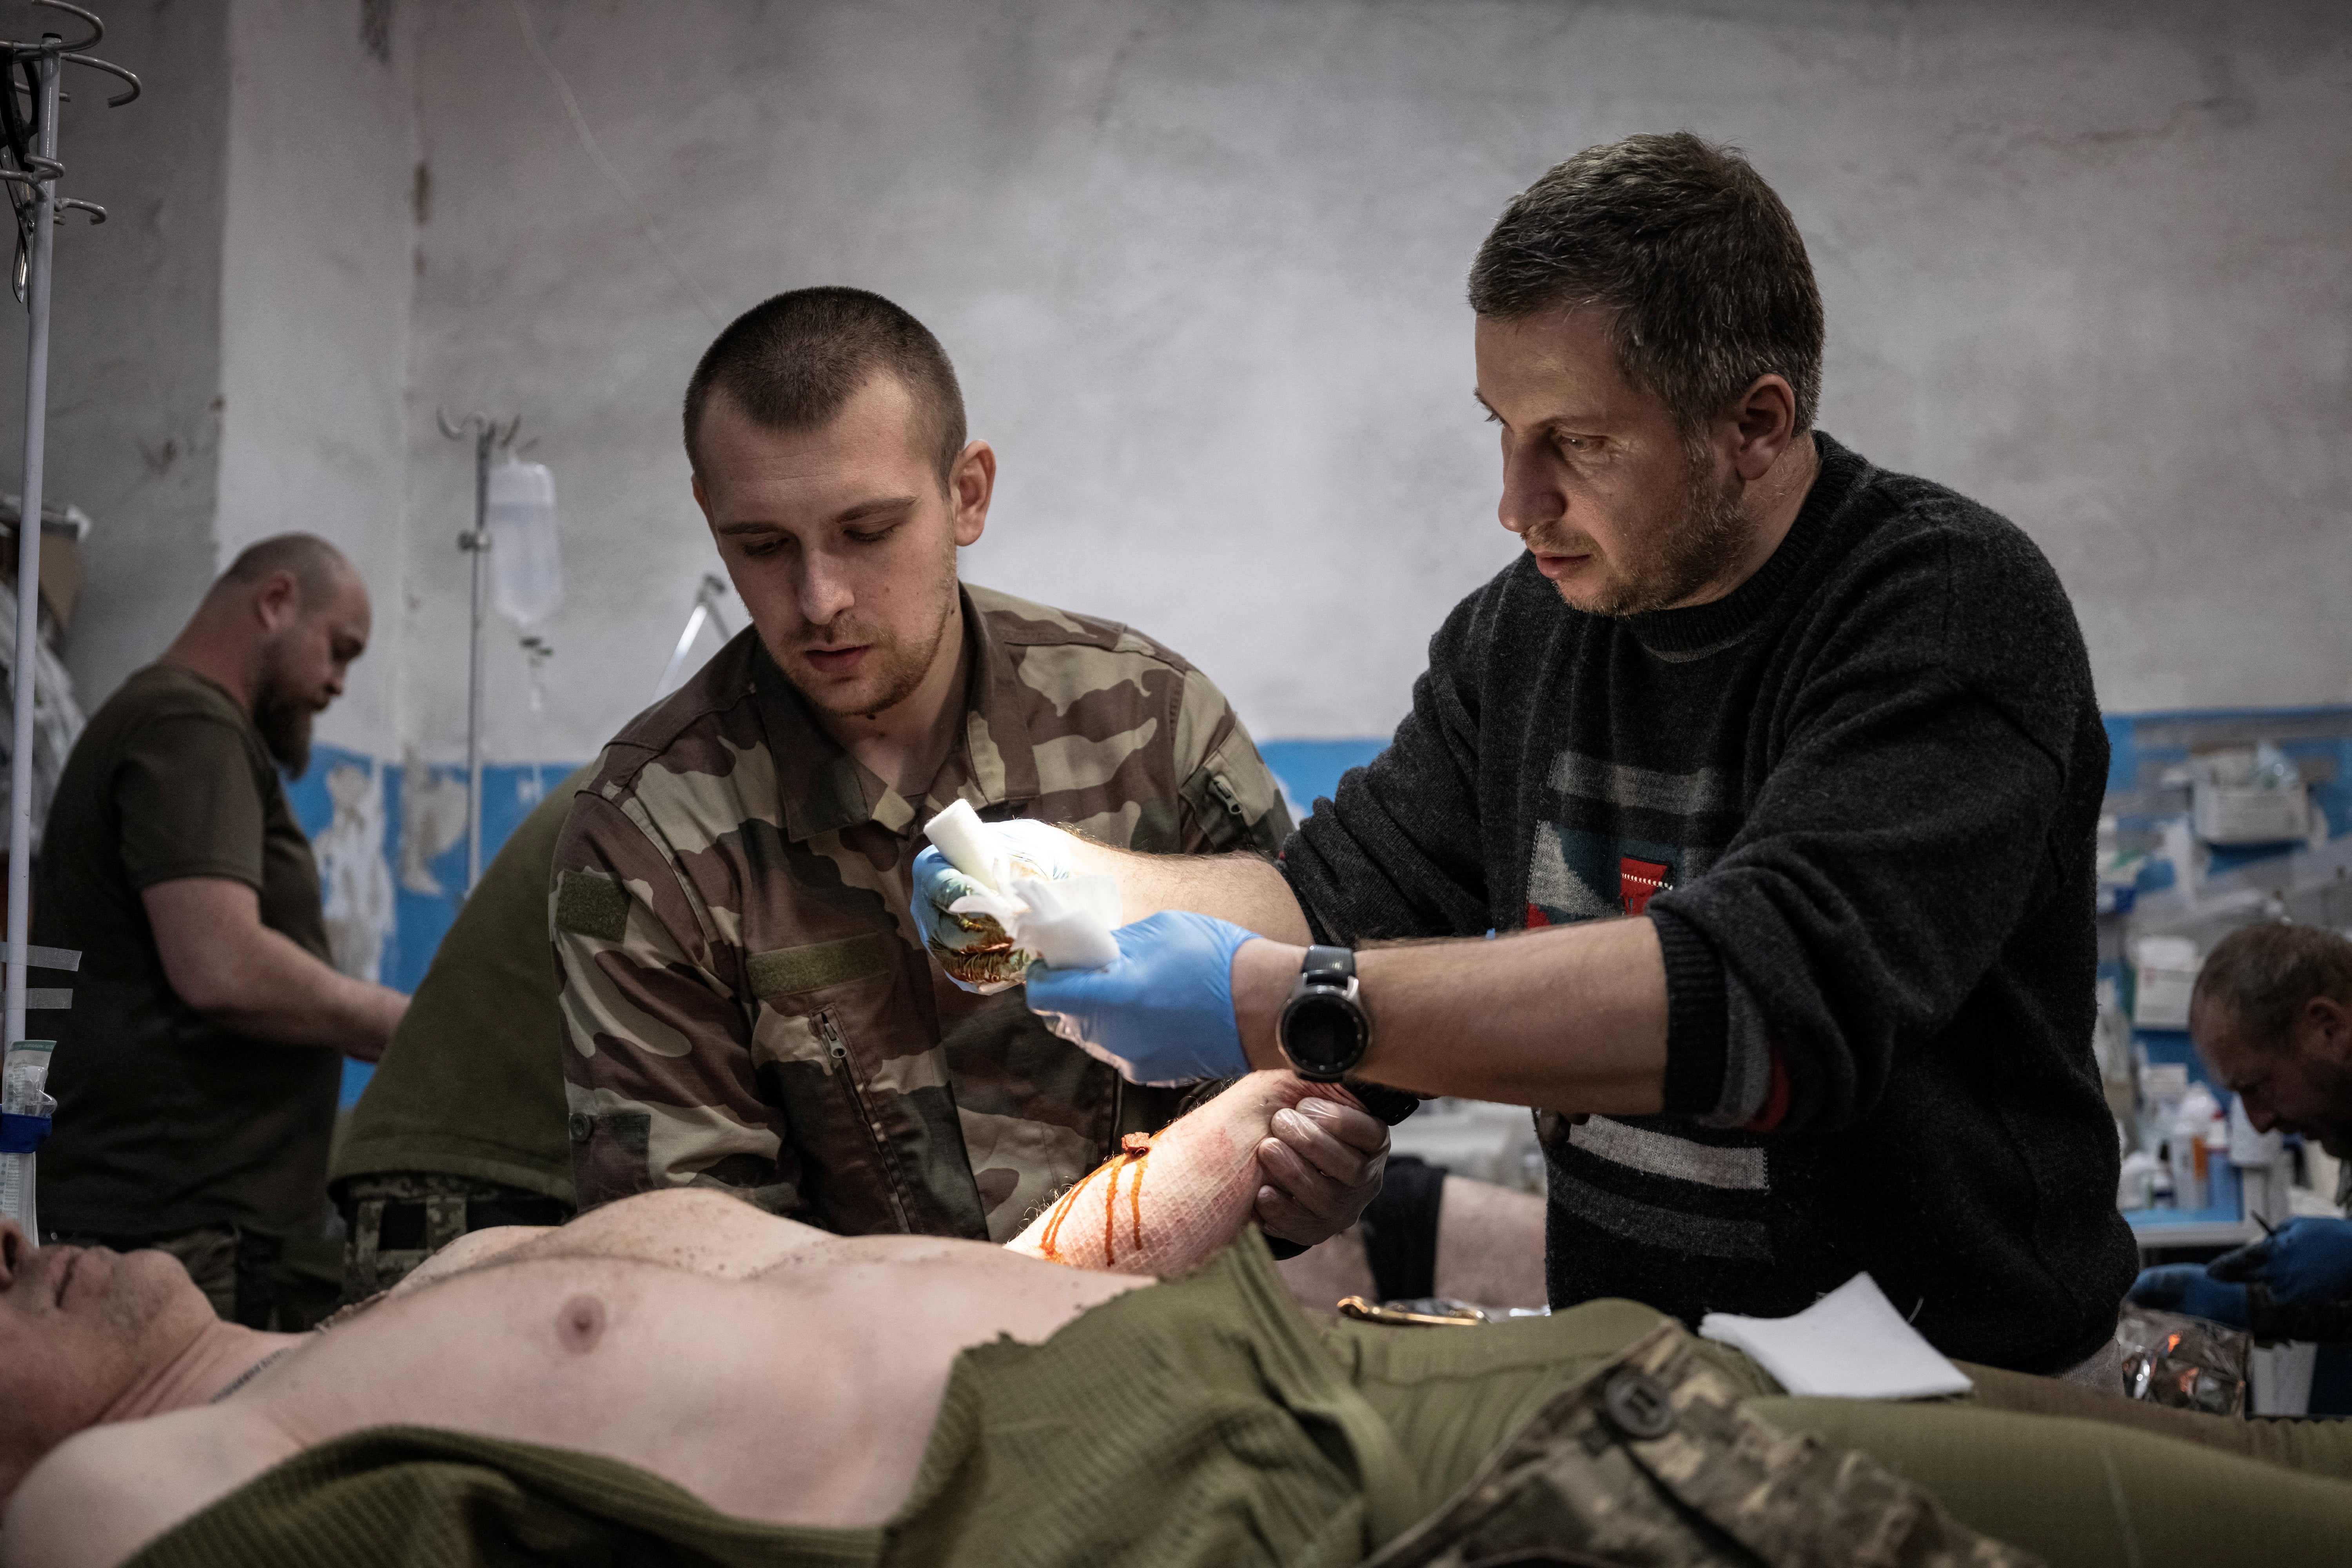 General practitioner Volodymyr and general surgeon Yuri treat a wounded Ukrainian soldier